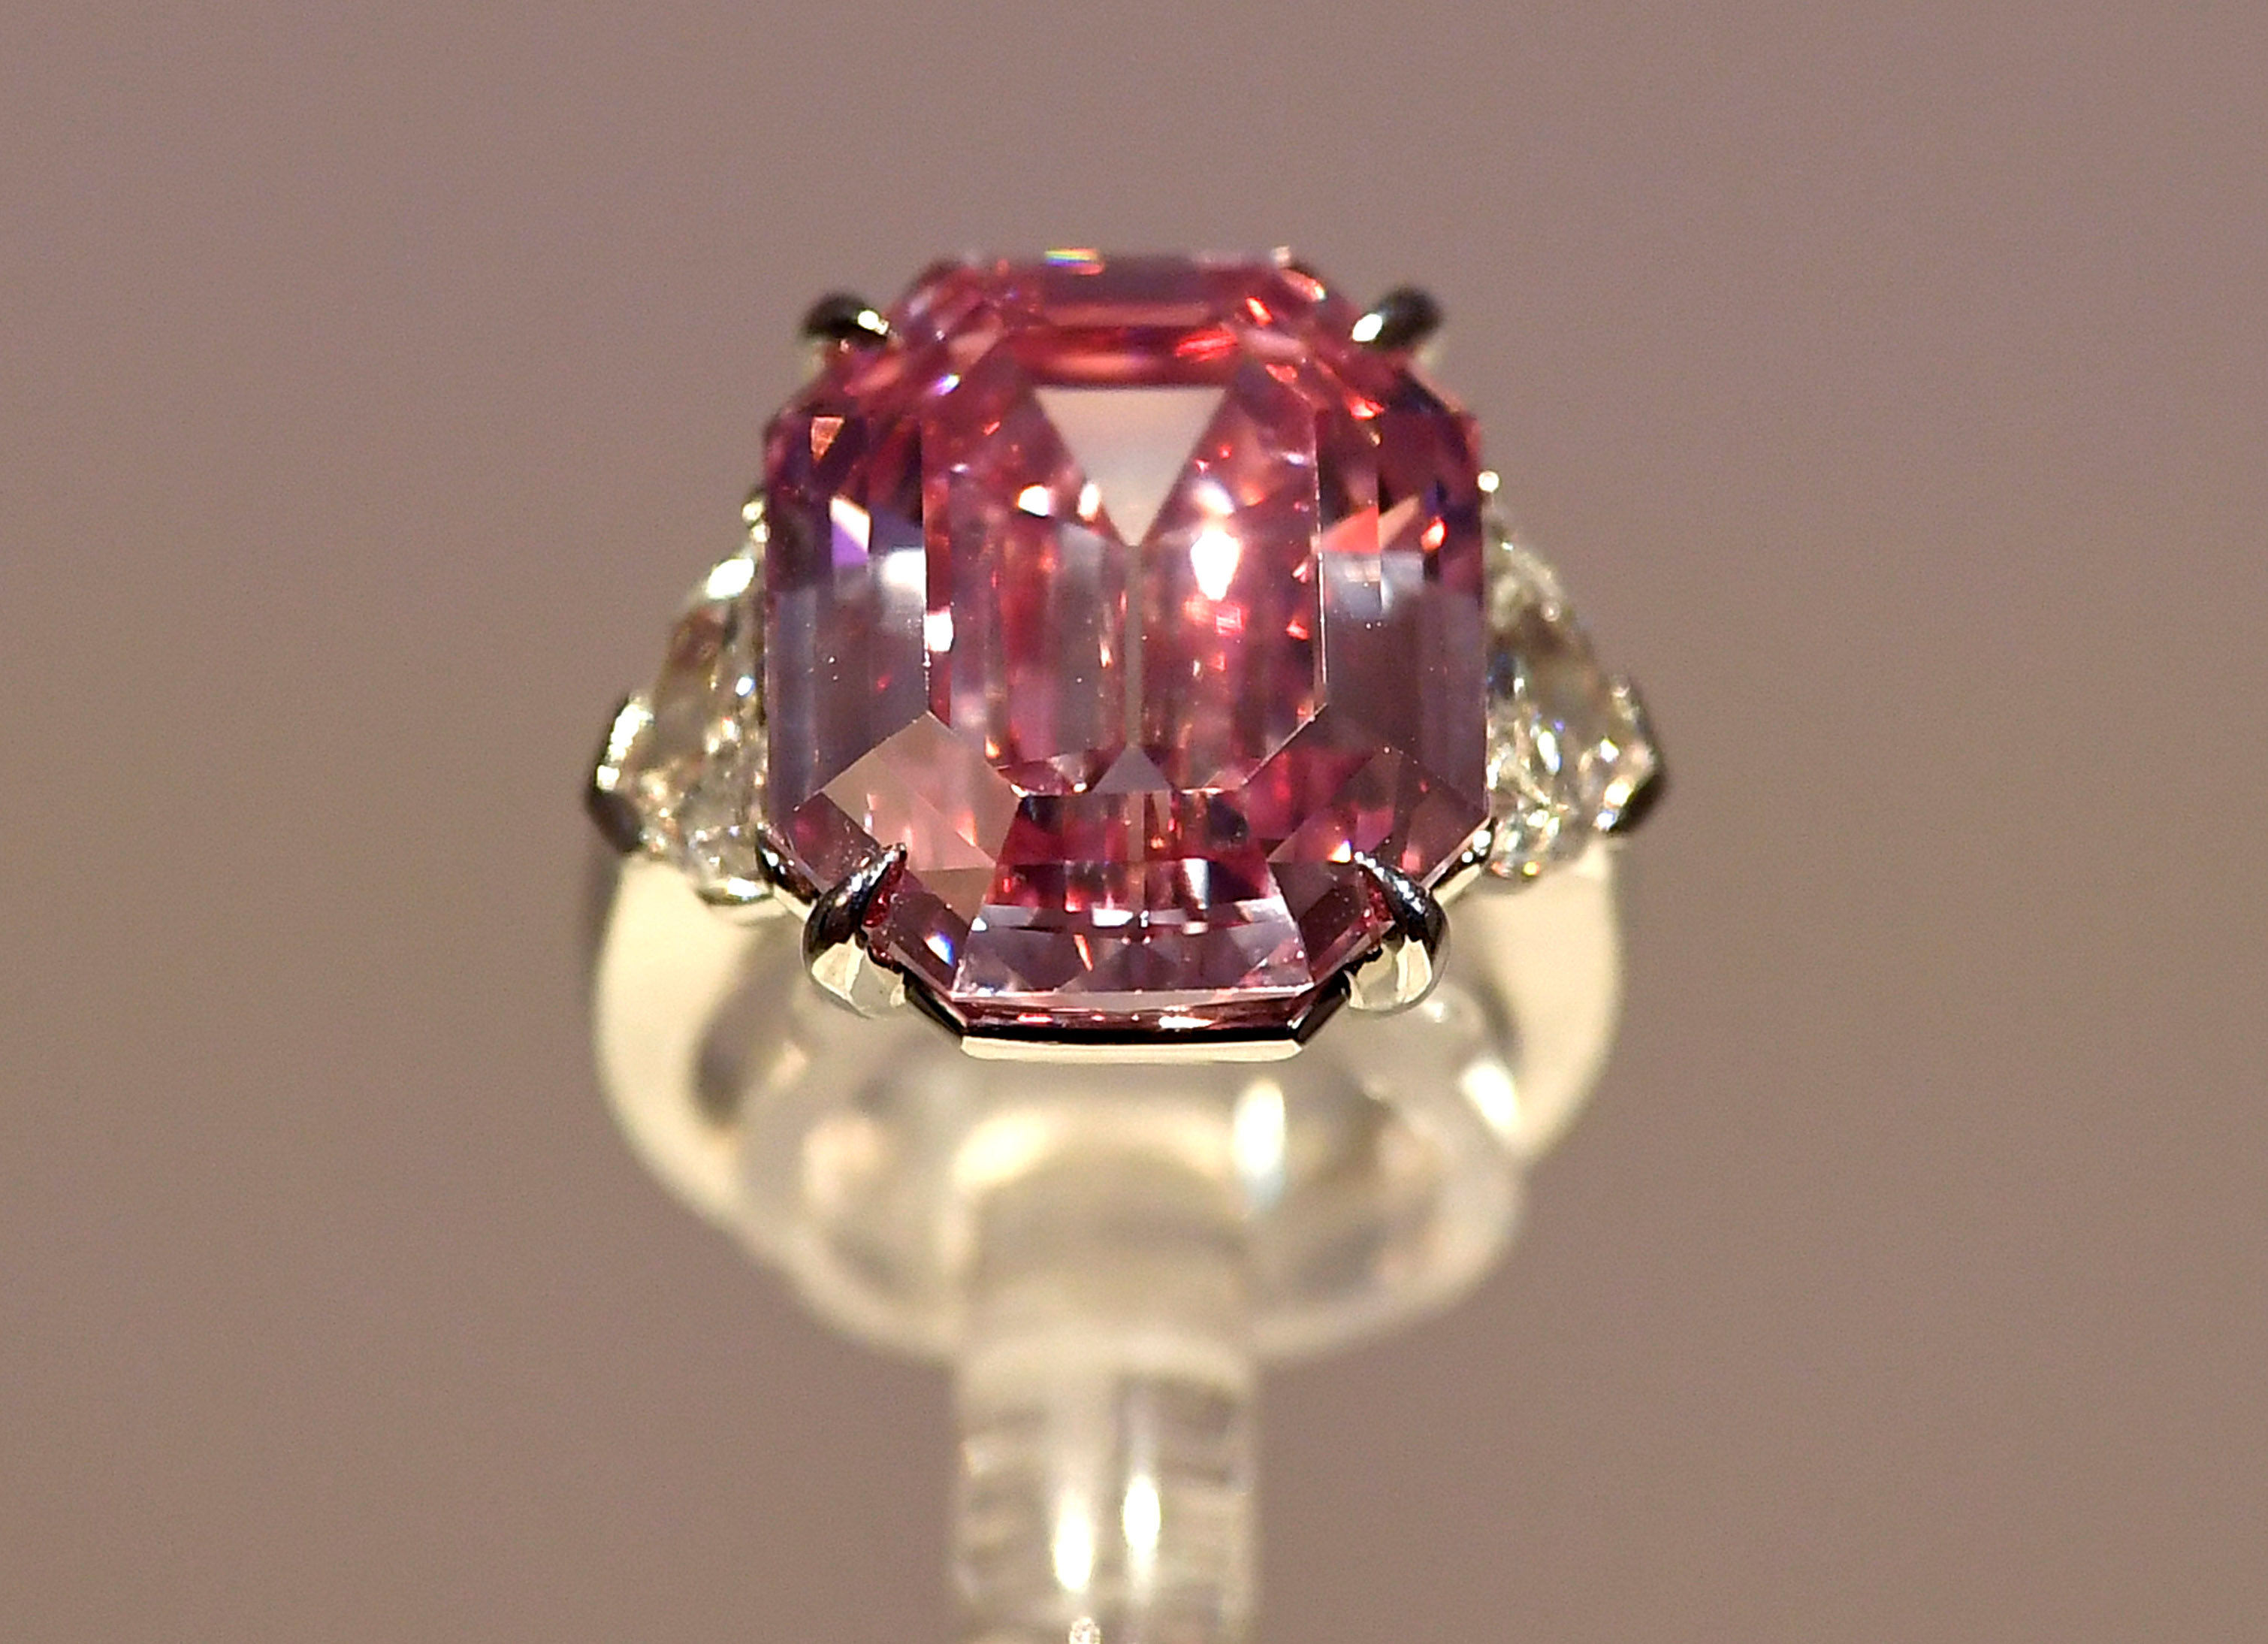 This 19-Carat Pink Diamond Just Sold for $29 Million at Christie's